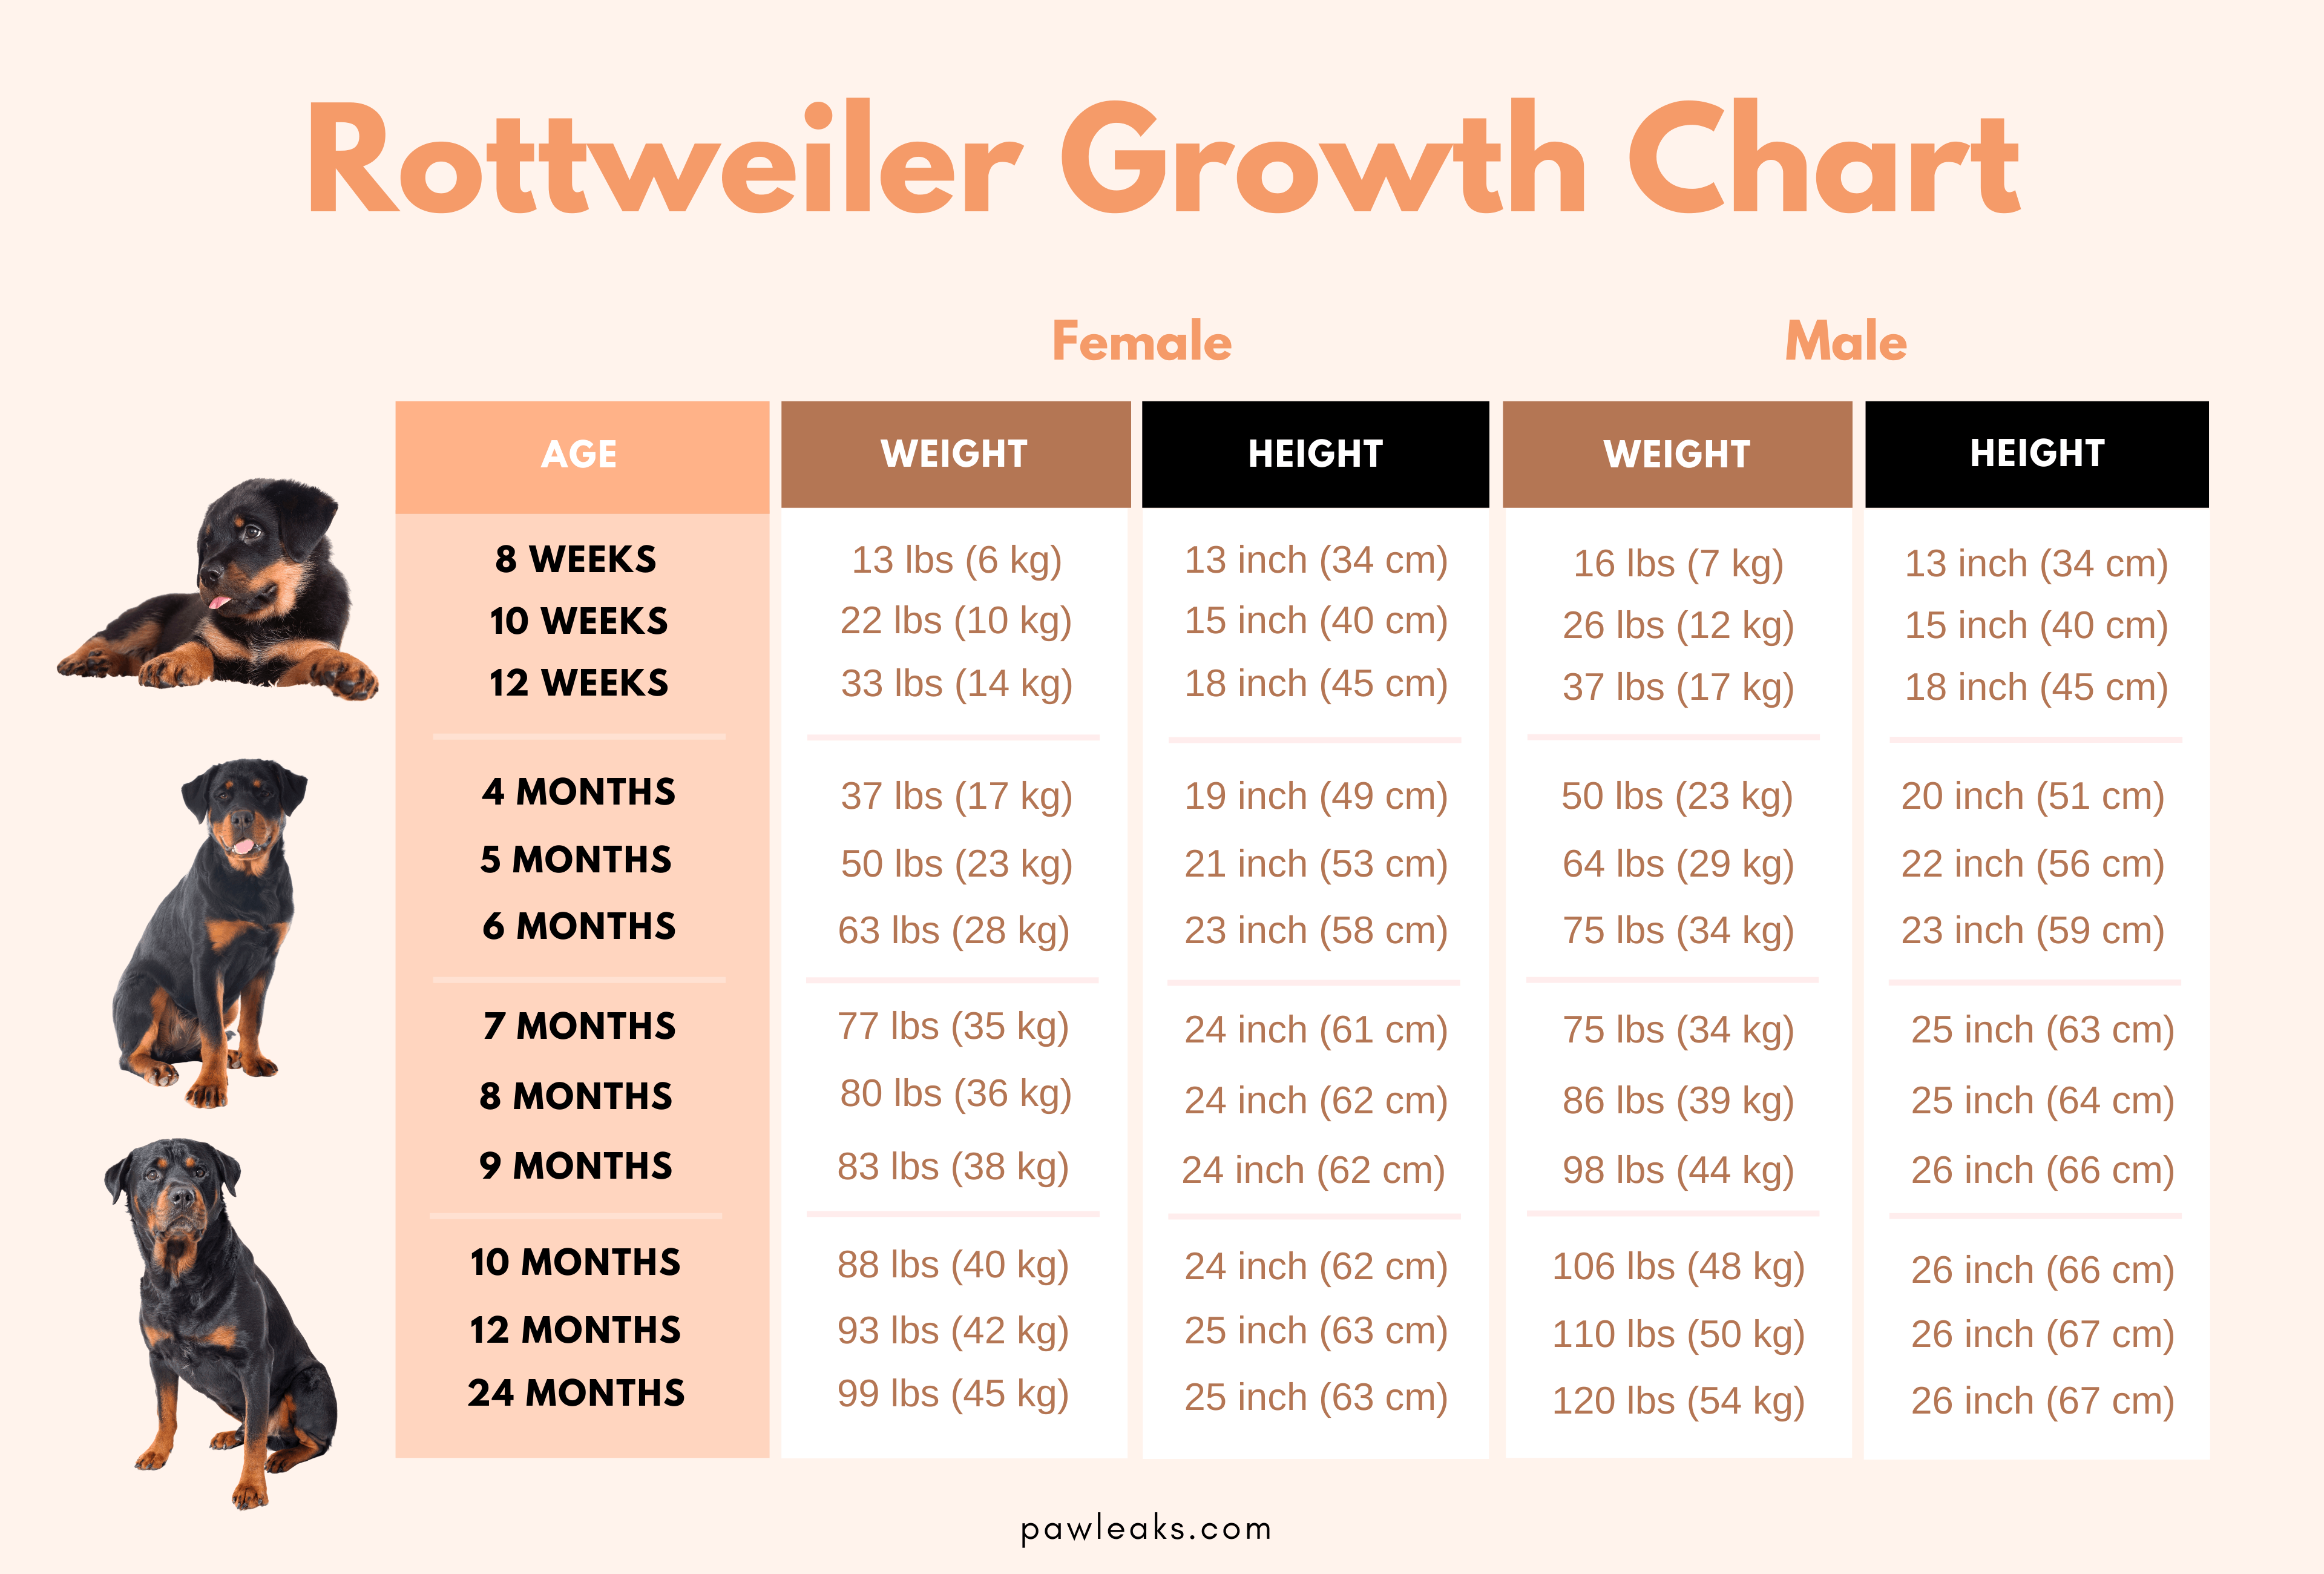 Rottweiler Growth Chart When Are Rottweilers Fully Grown